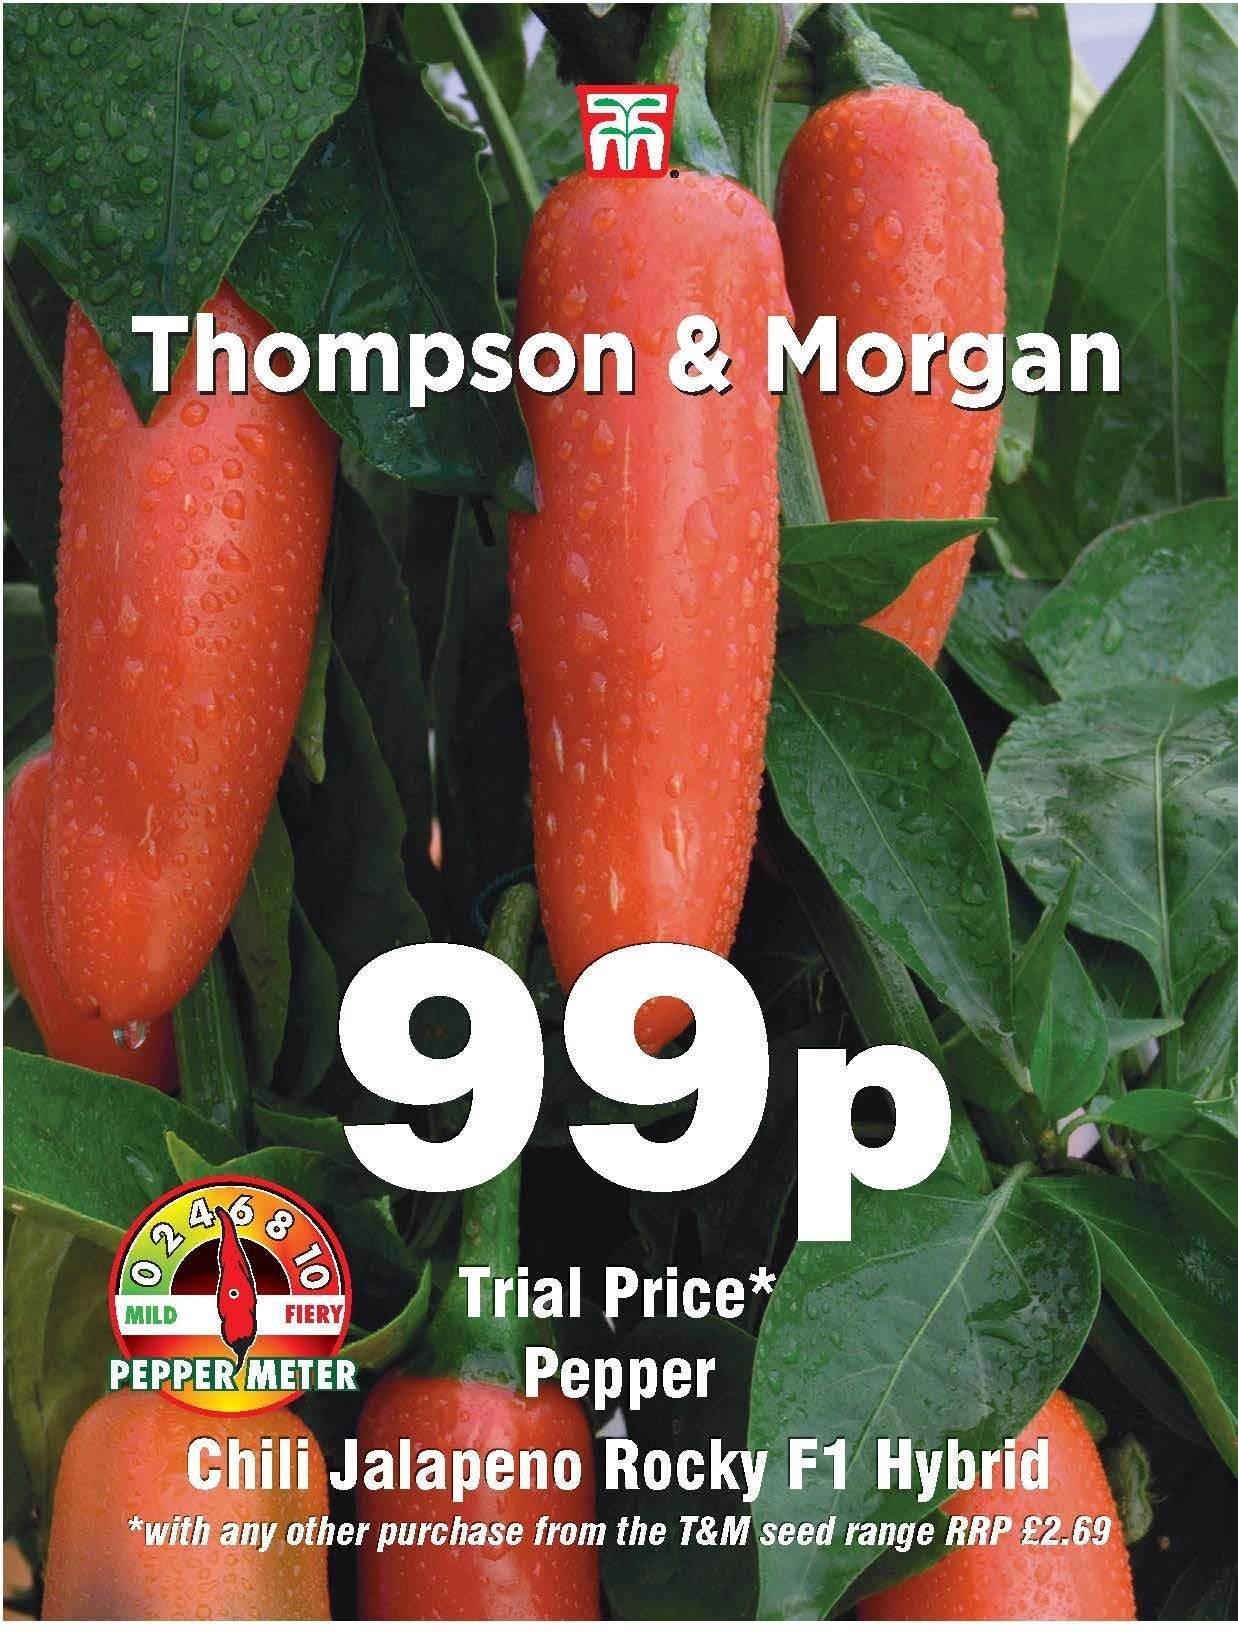 Thompson & Morgan Pepper Chili Jalapeno Rocky F1 hybrid 10 Seed Only 99p